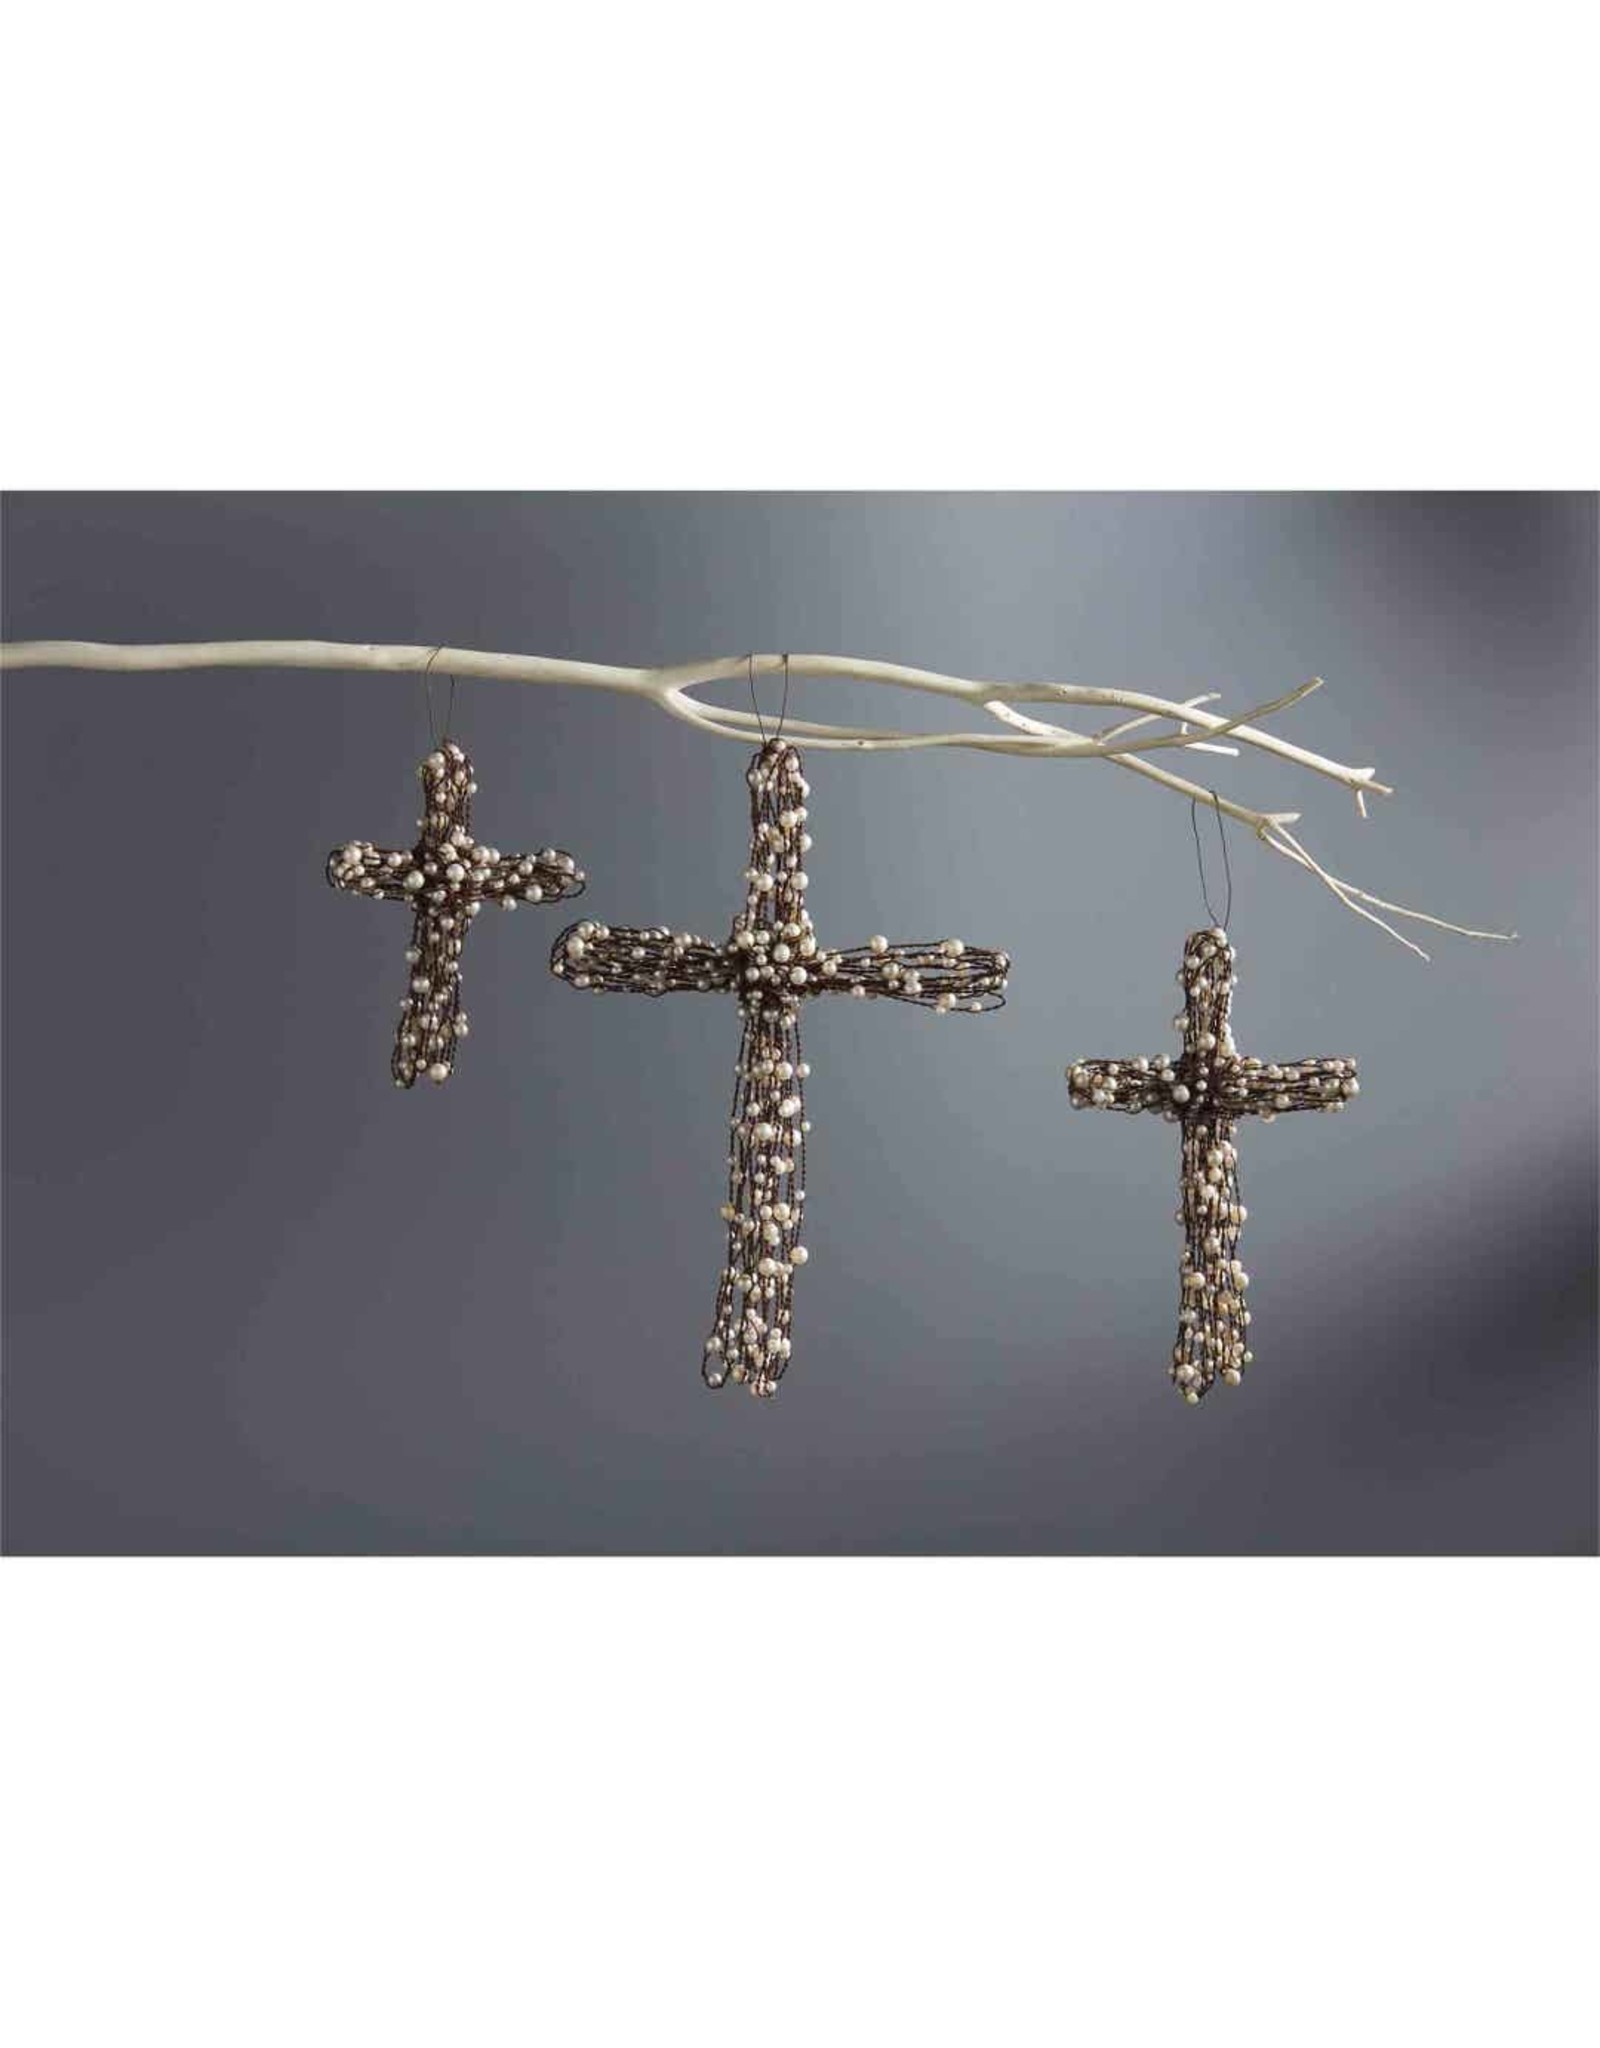 Mud Pie Pearl Beaded Wire Cross | Small 7 Inch